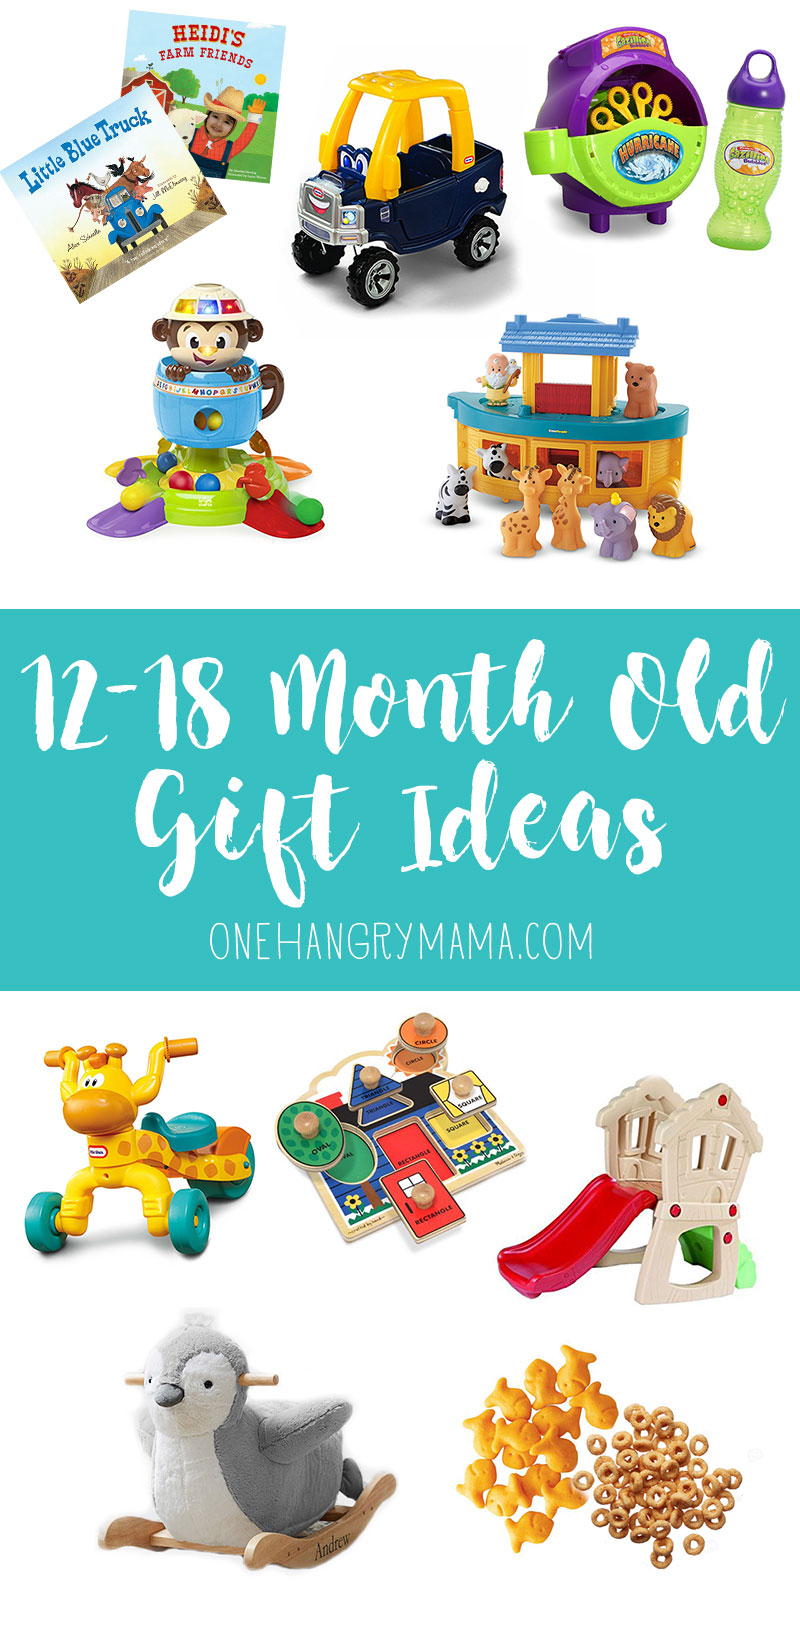 10 awesome gift ideas for 12-18 month old toddlers.